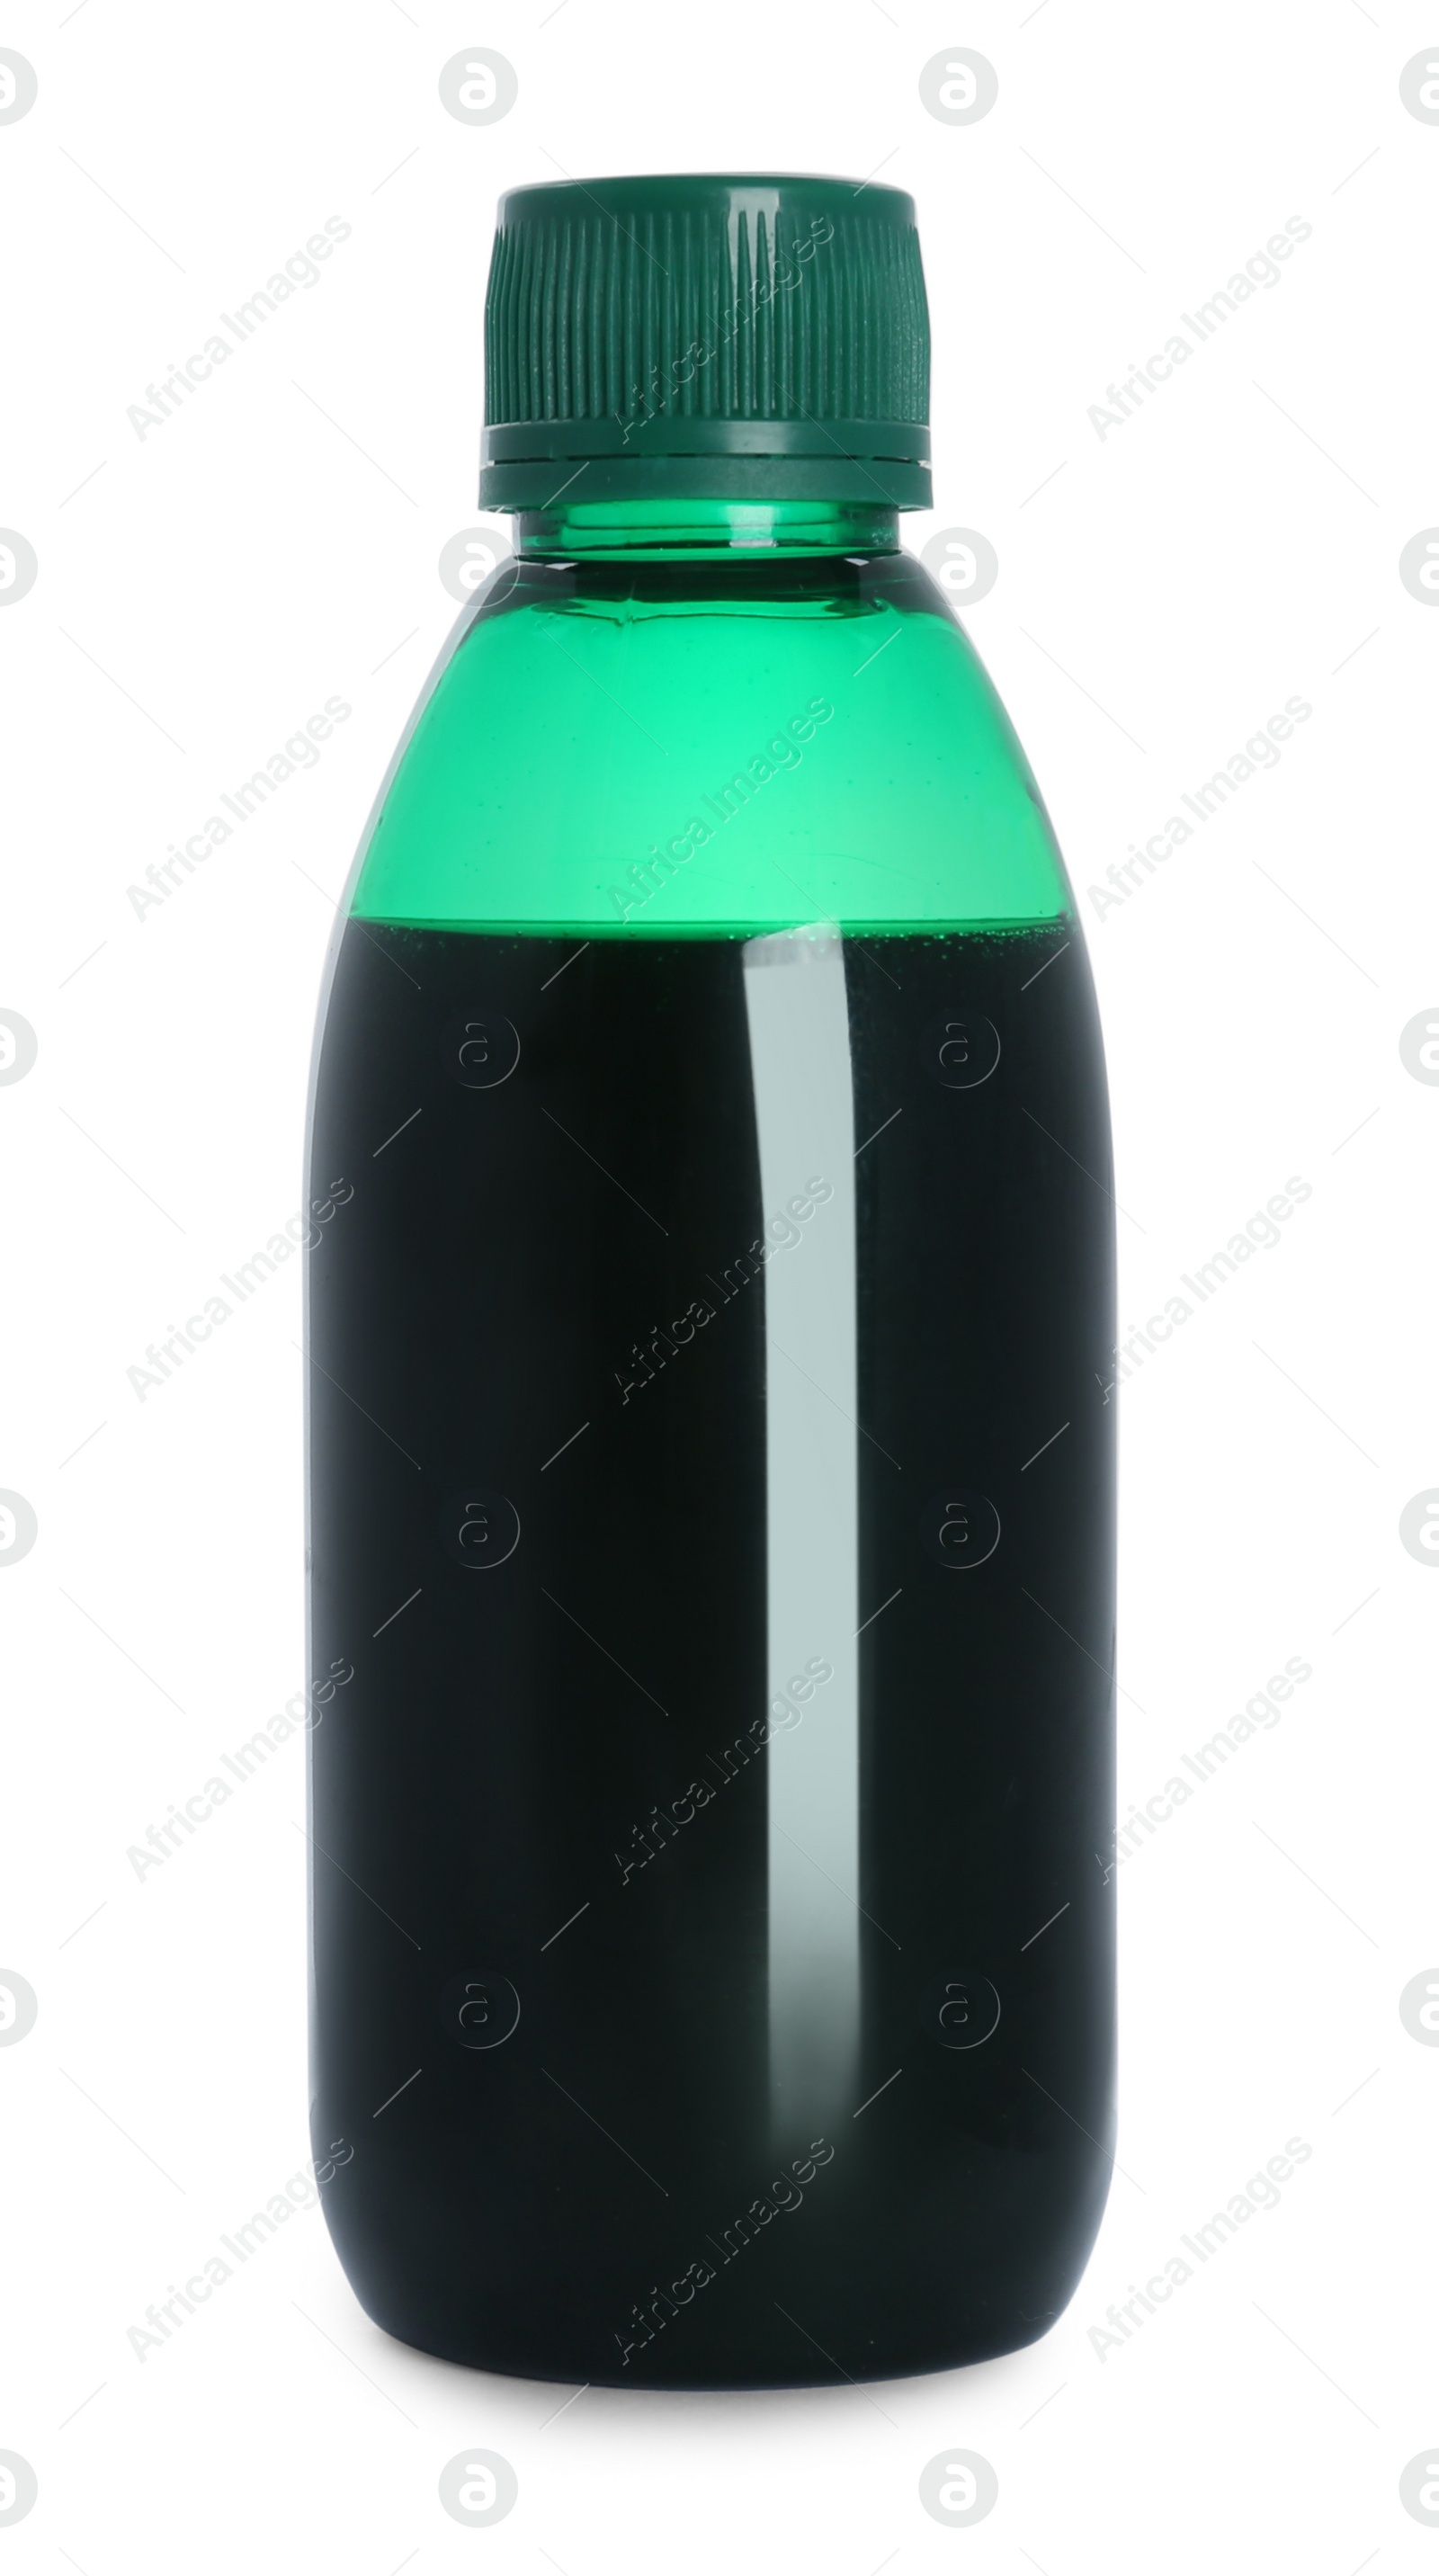 Photo of Bottle of cough syrup isolated on white